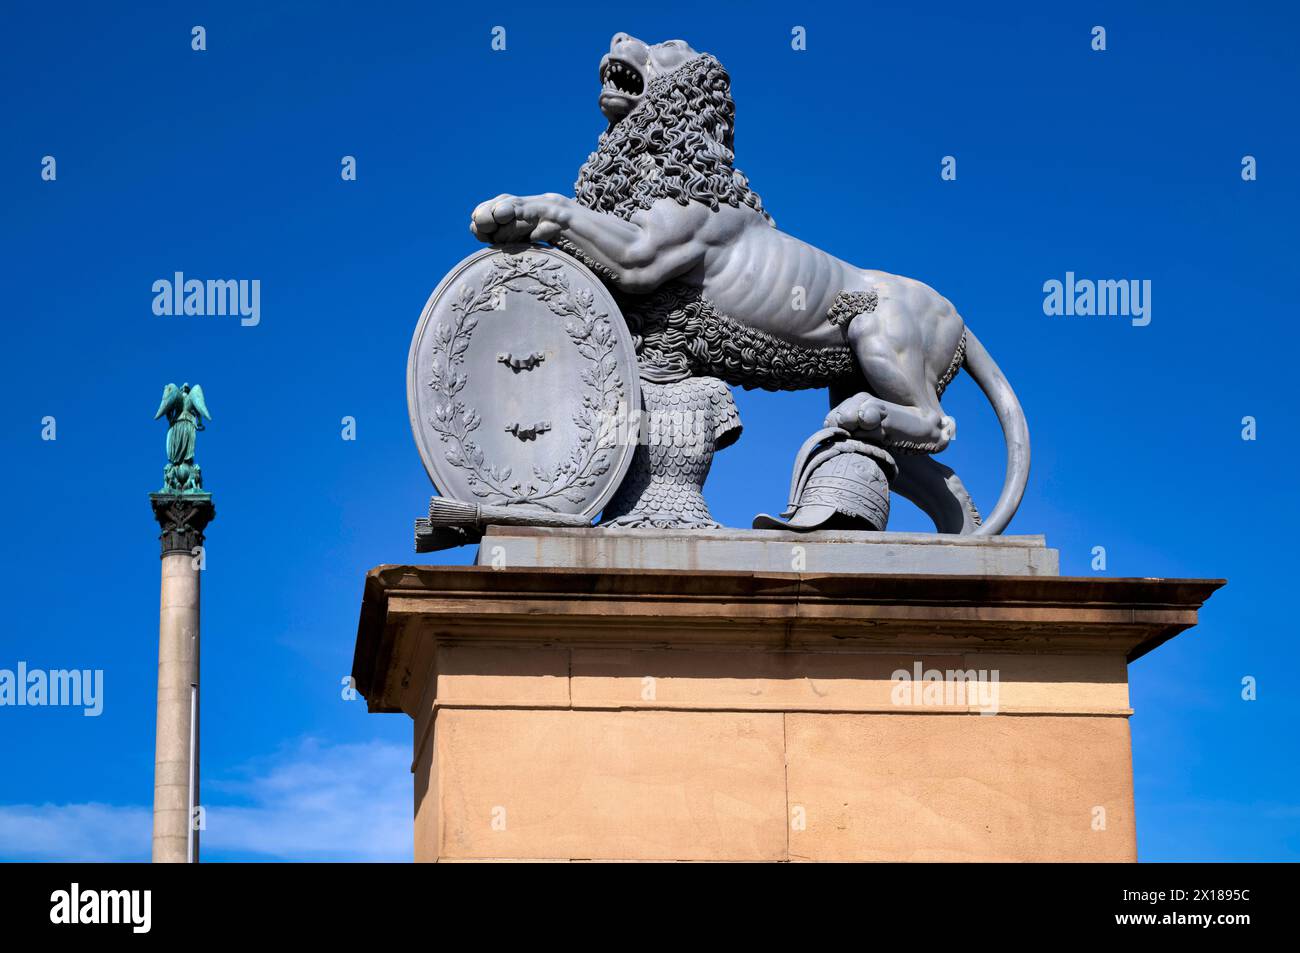 Jubilee column with Concordia, heraldic animal lion by Anton von ISOPIS in front of the main portal and cour d'honneur Neues Schloss, Schlossplatz Stock Photo